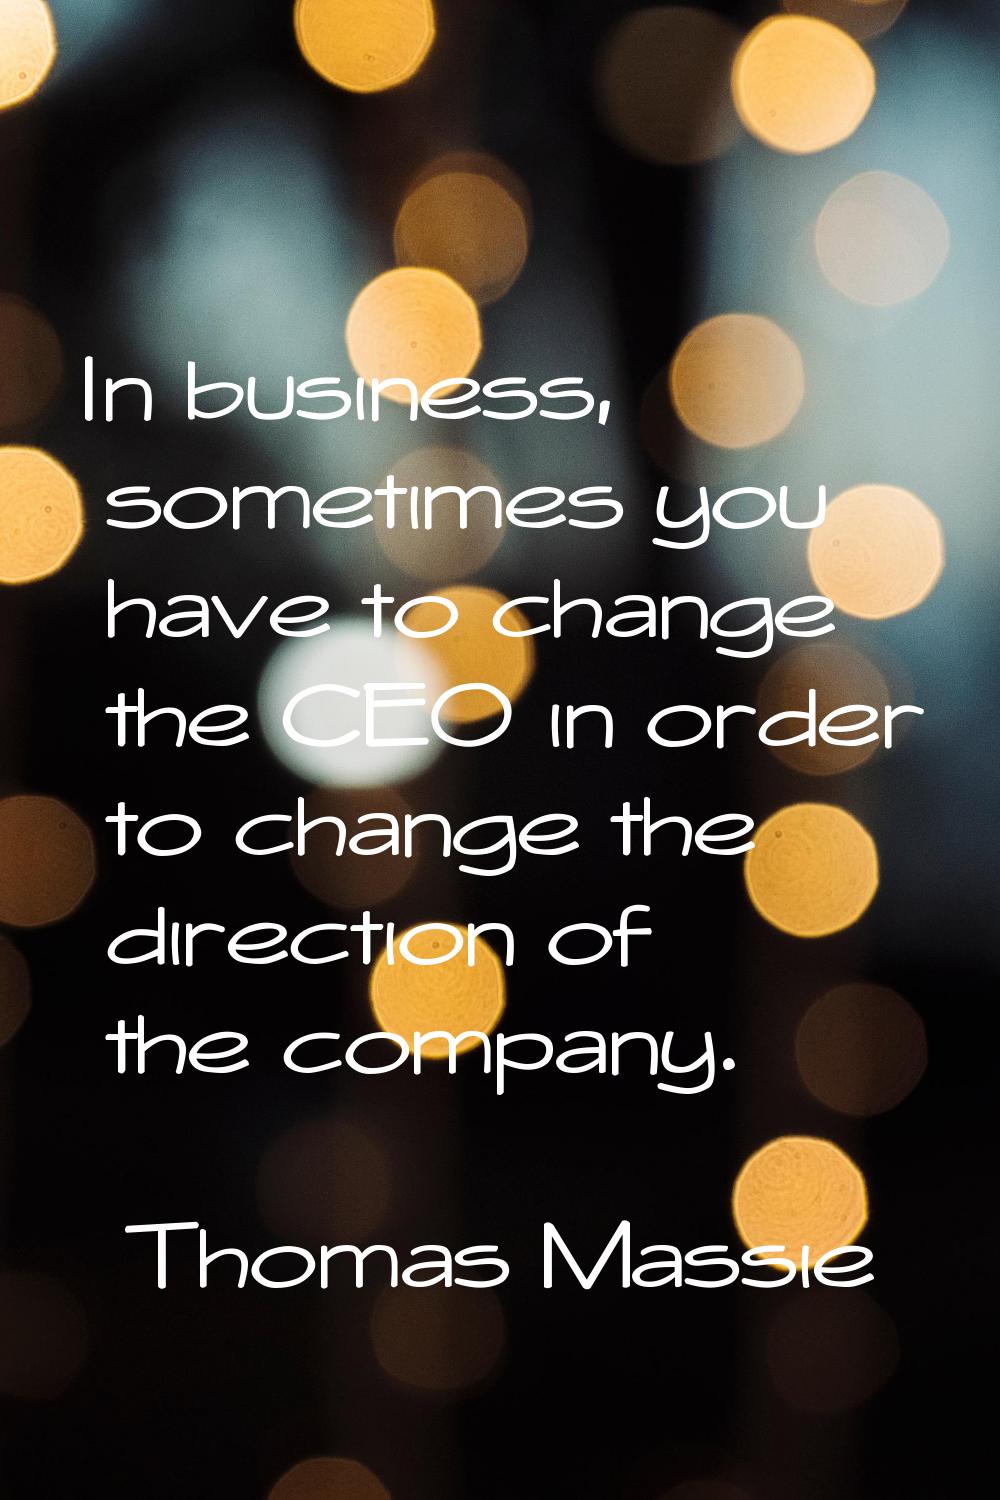 In business, sometimes you have to change the CEO in order to change the direction of the company.